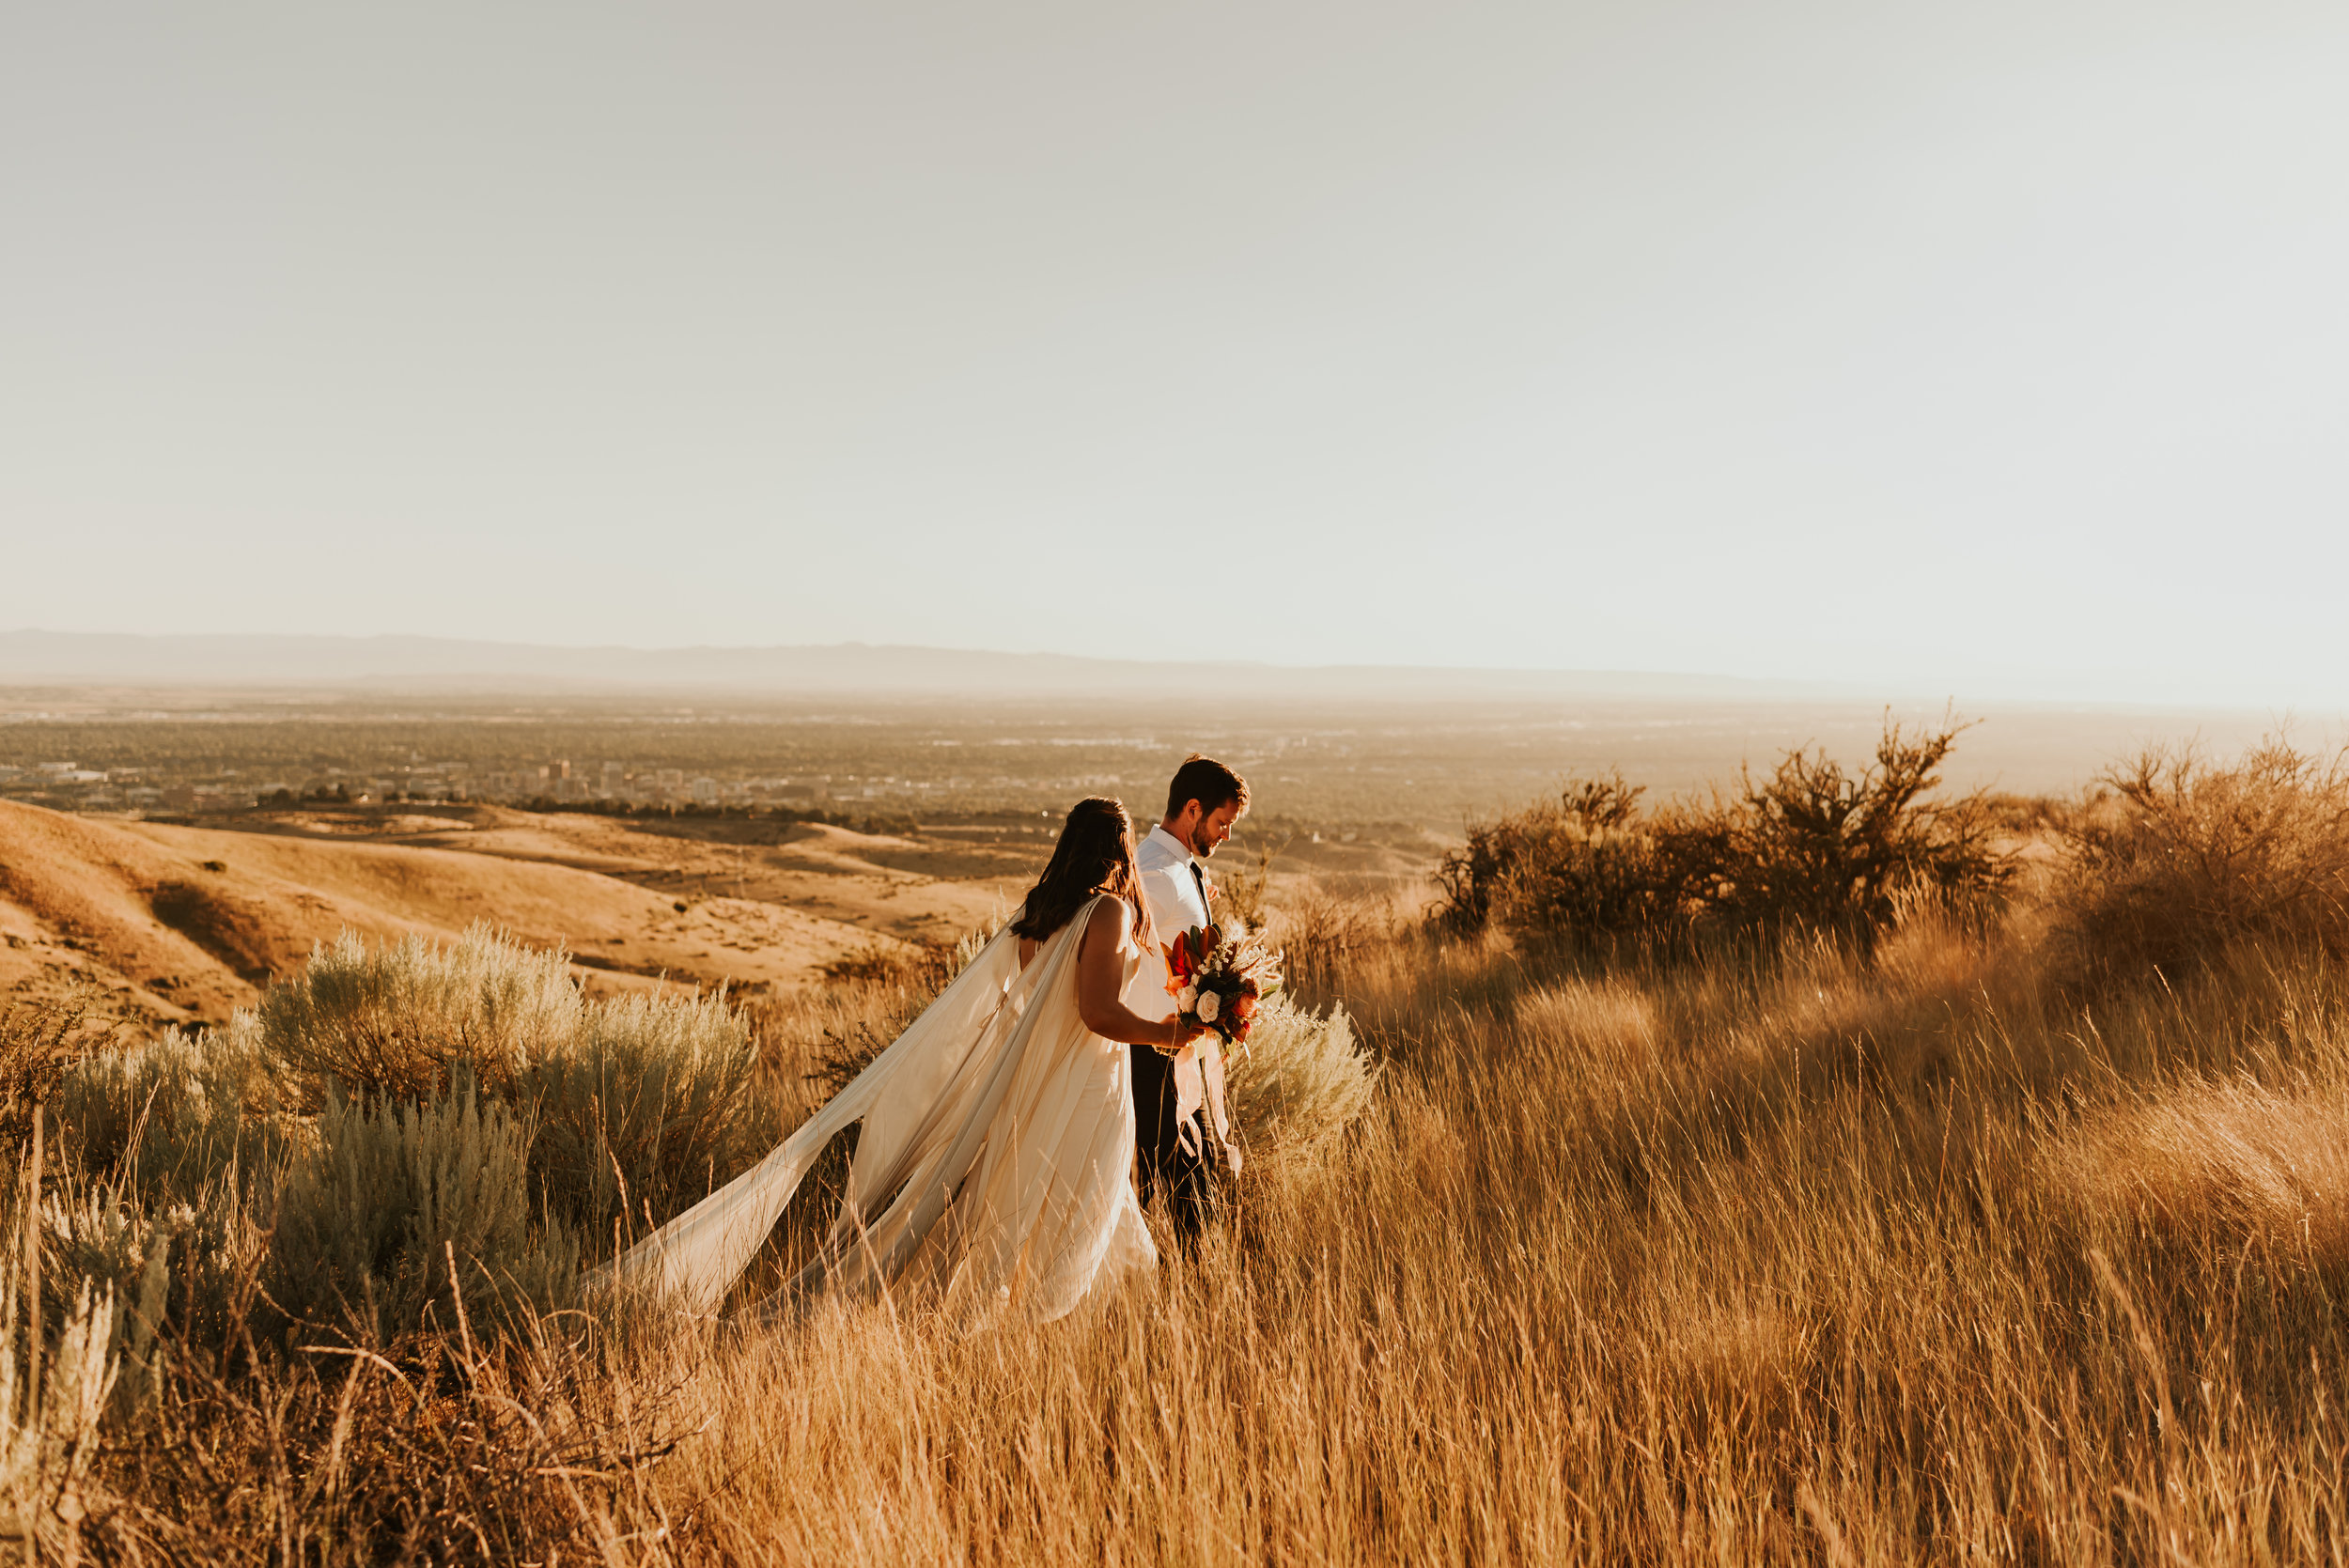 Boise Foothills Bridal Session | Idaho Elopement | Intimate Boise, Idaho Wedding | Carrie Rogers Photography | Daci Gowns